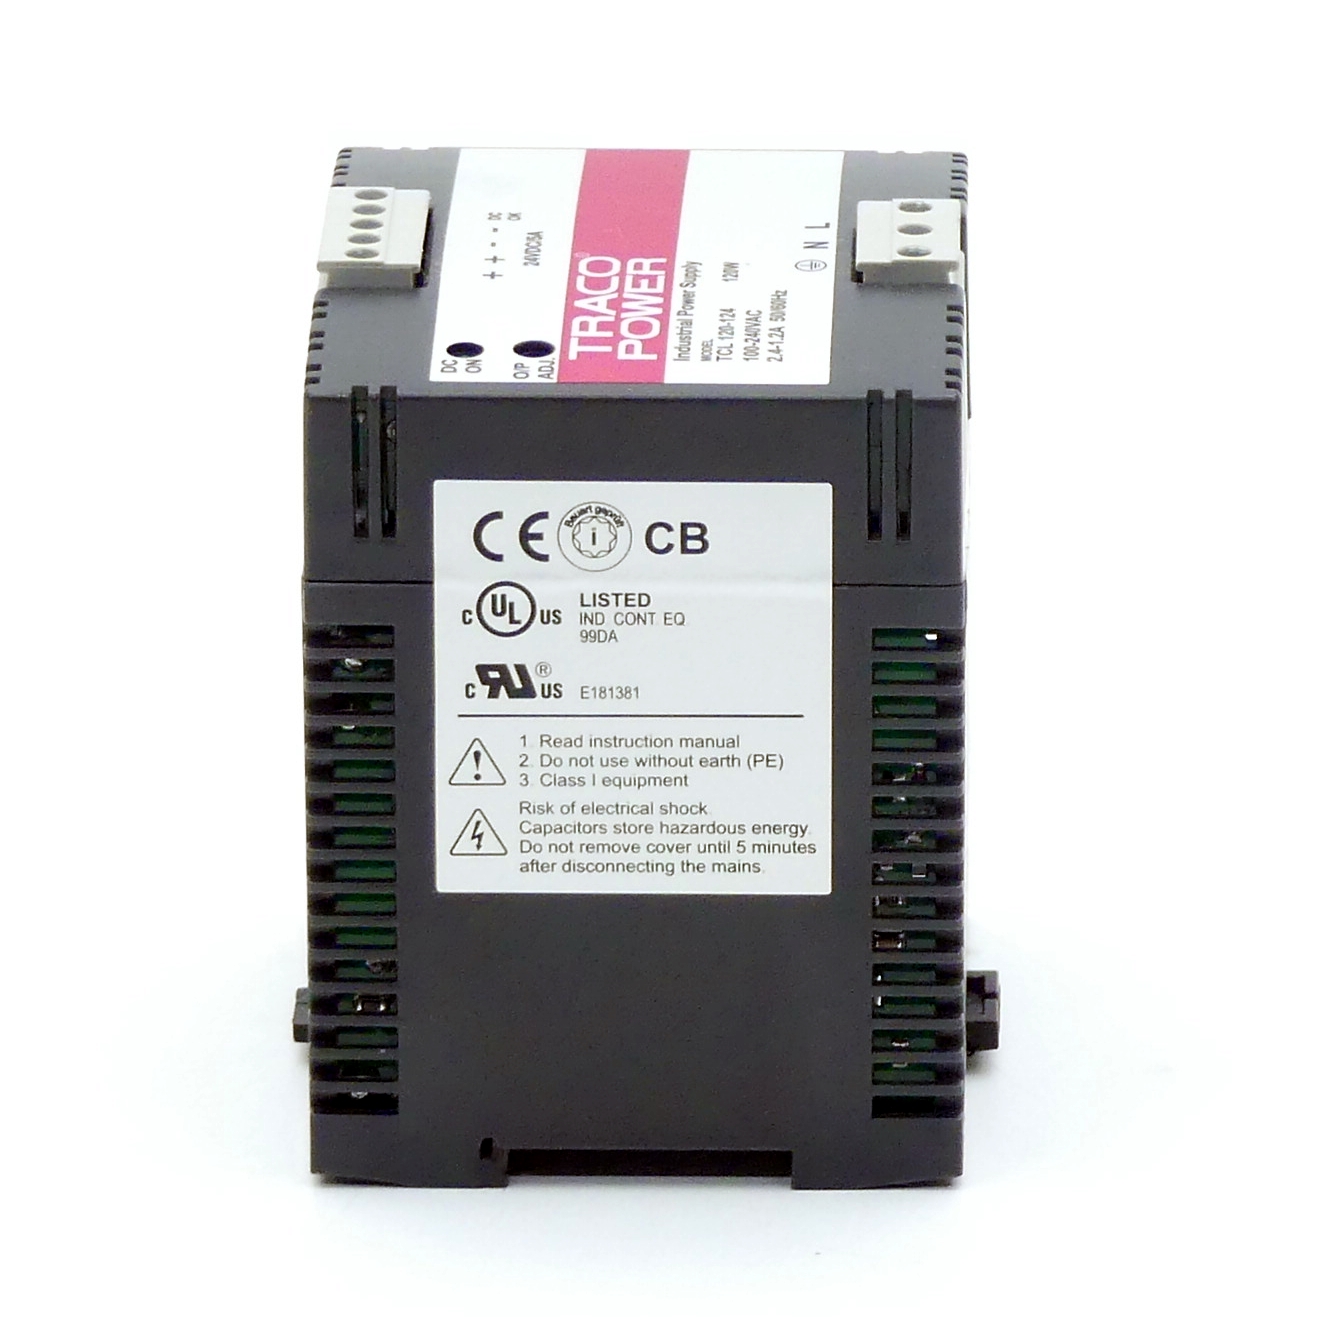 Power adapter TCL 120-124 